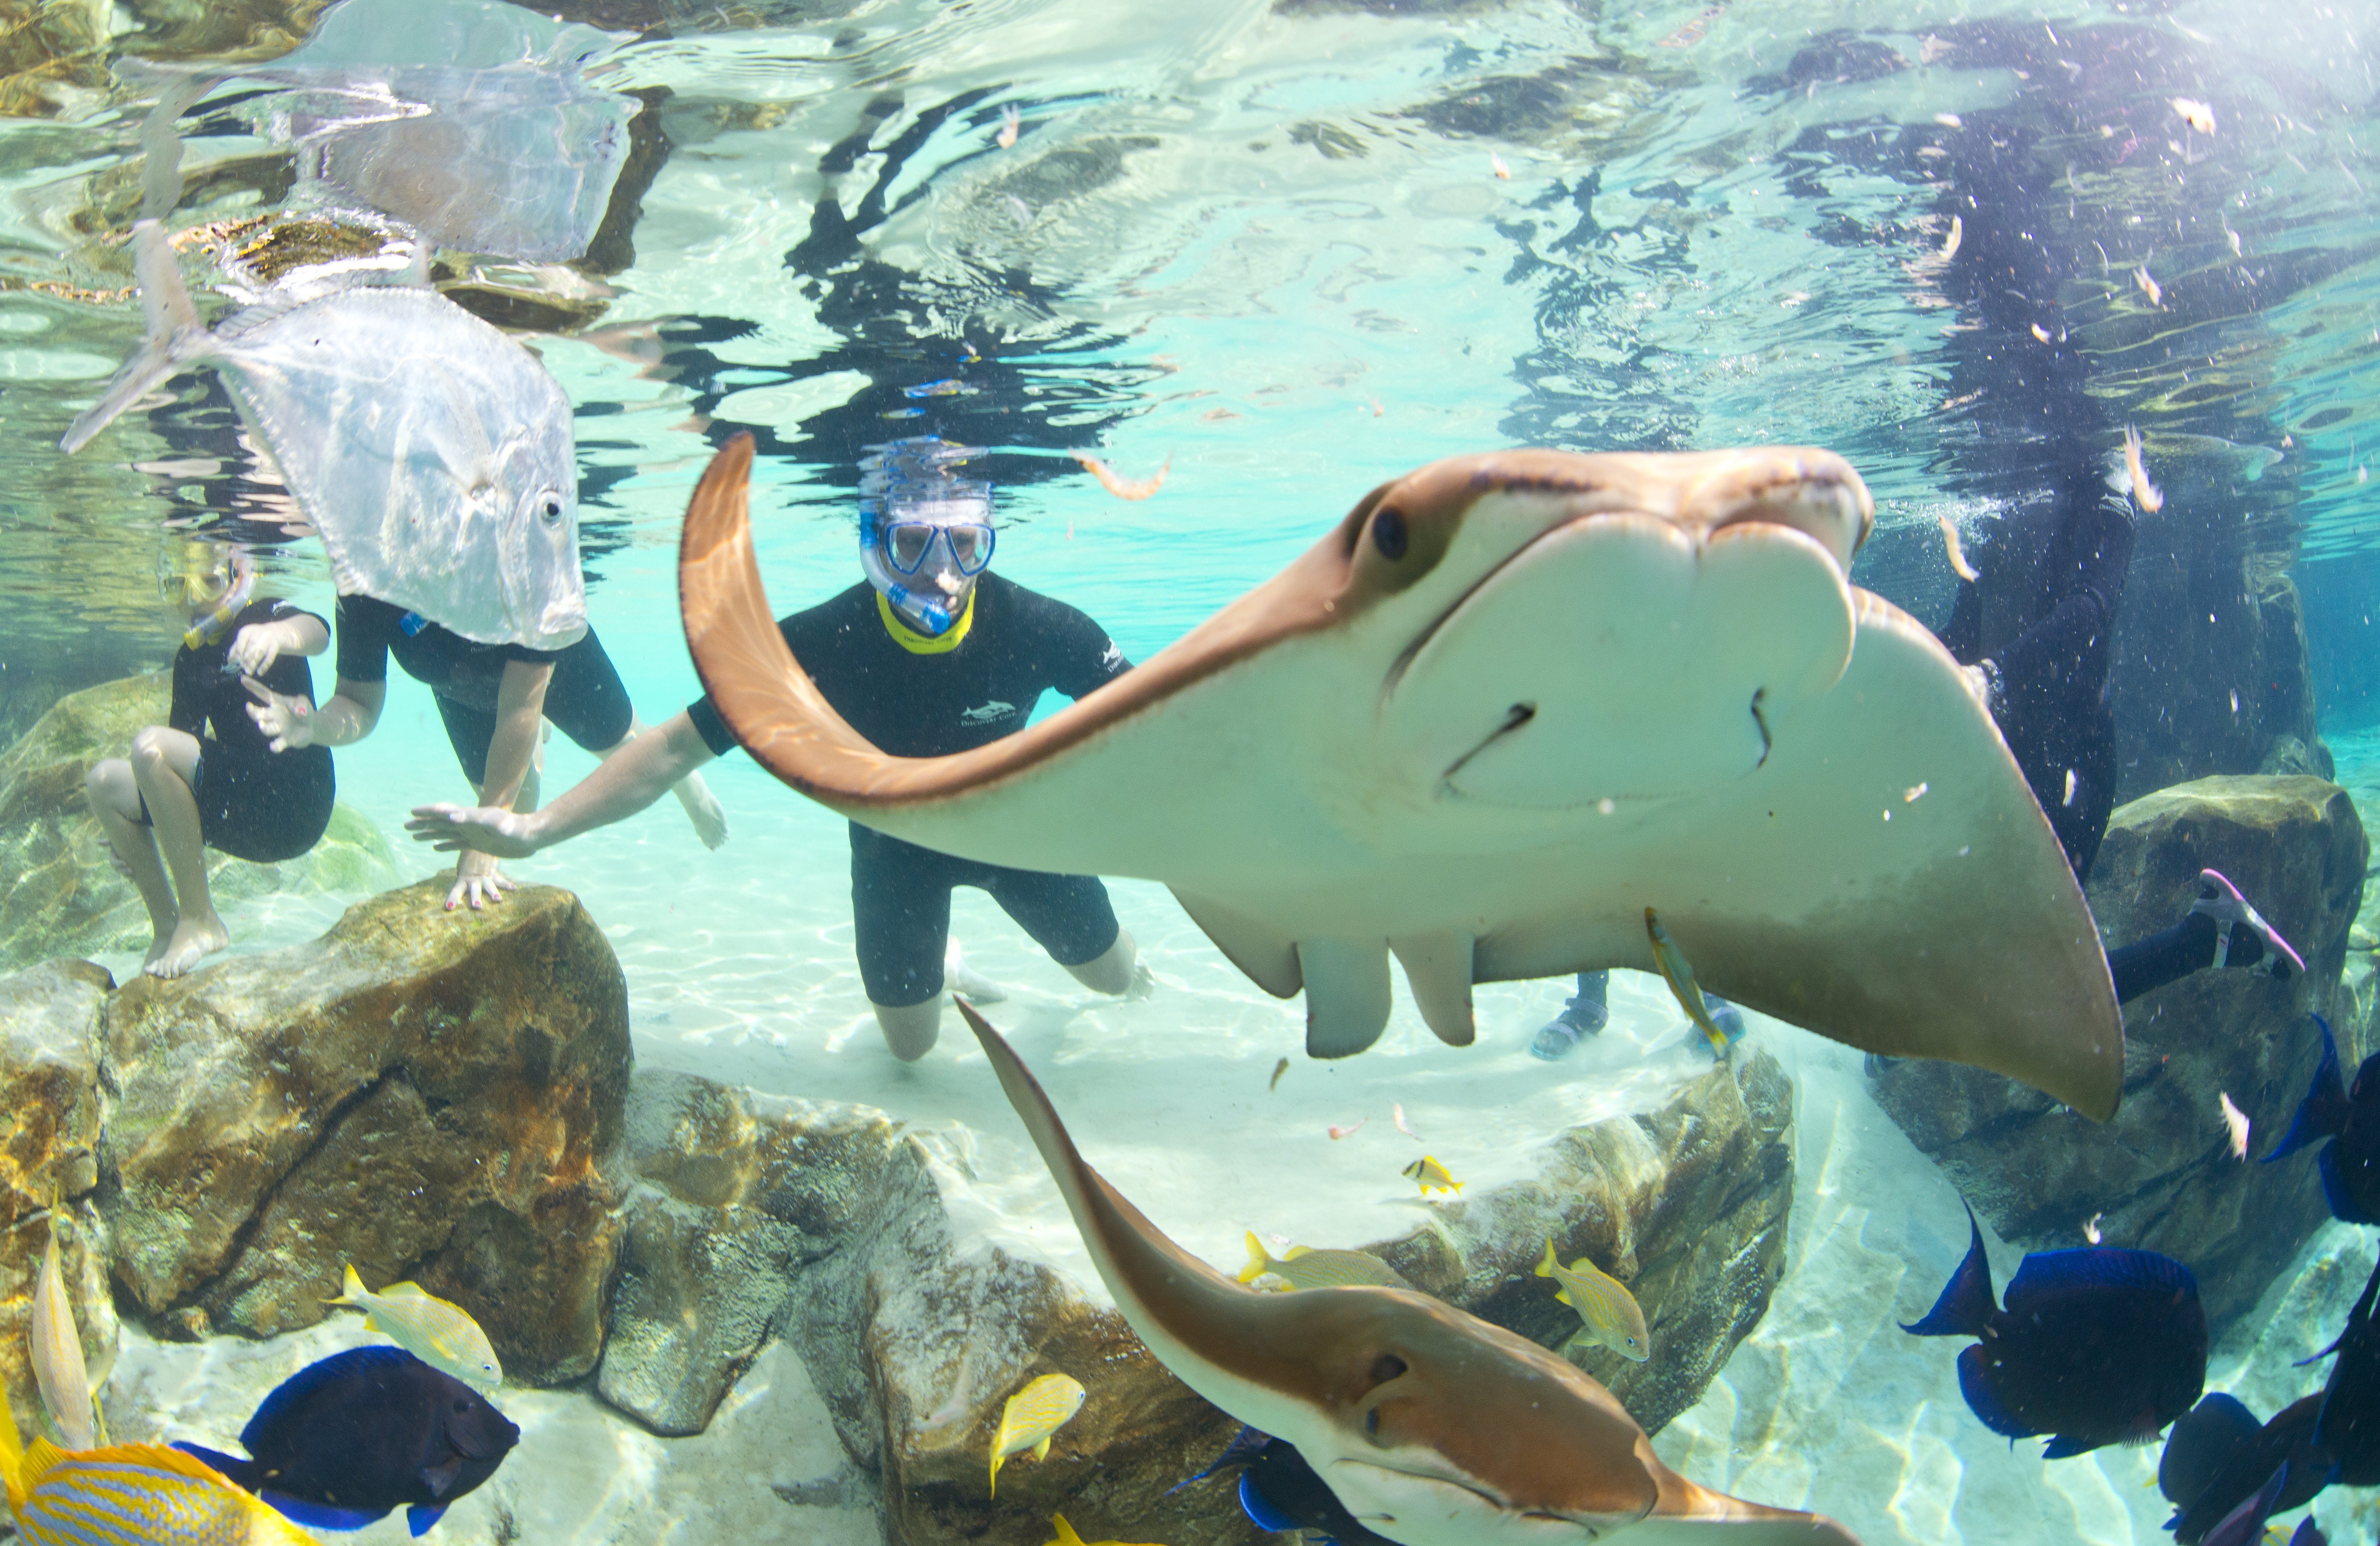 Stingray's soar through the water over at Discovery Cove.